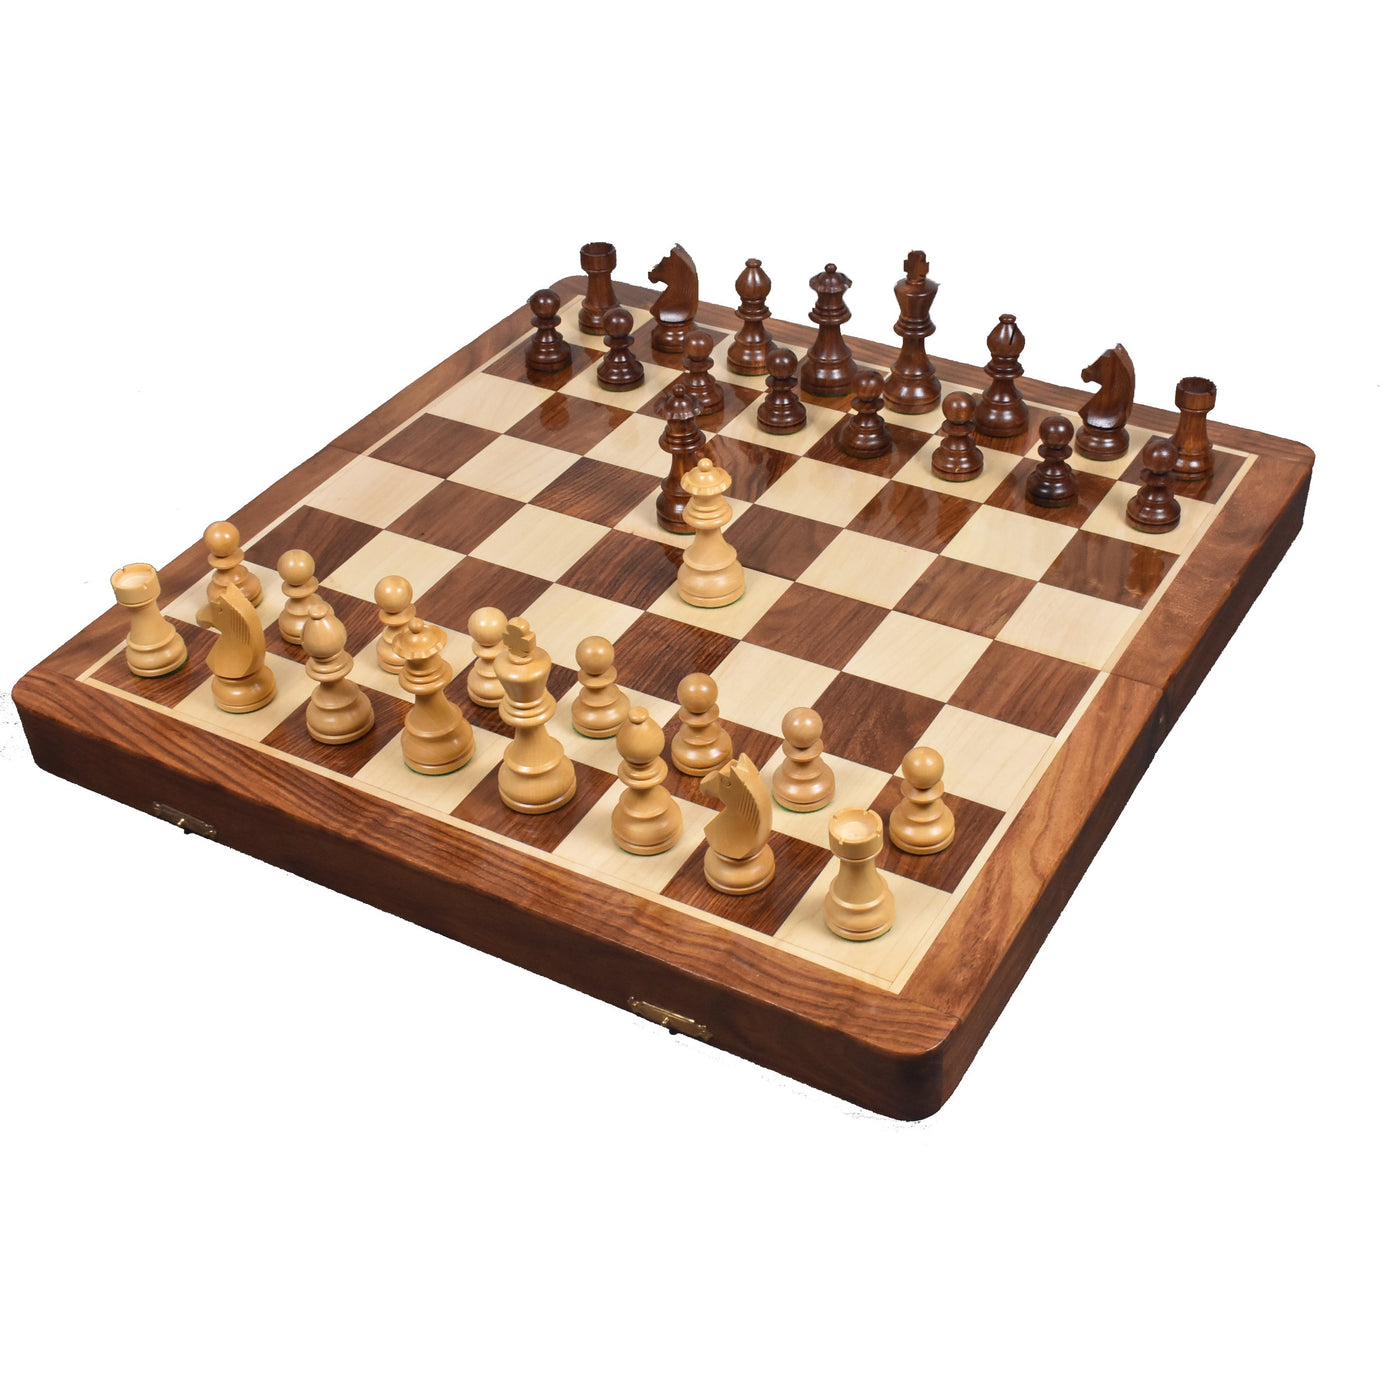 Golden Rosewood & Maple Wooden Inlaid Chess Set Board for Travel - Royalchessmall